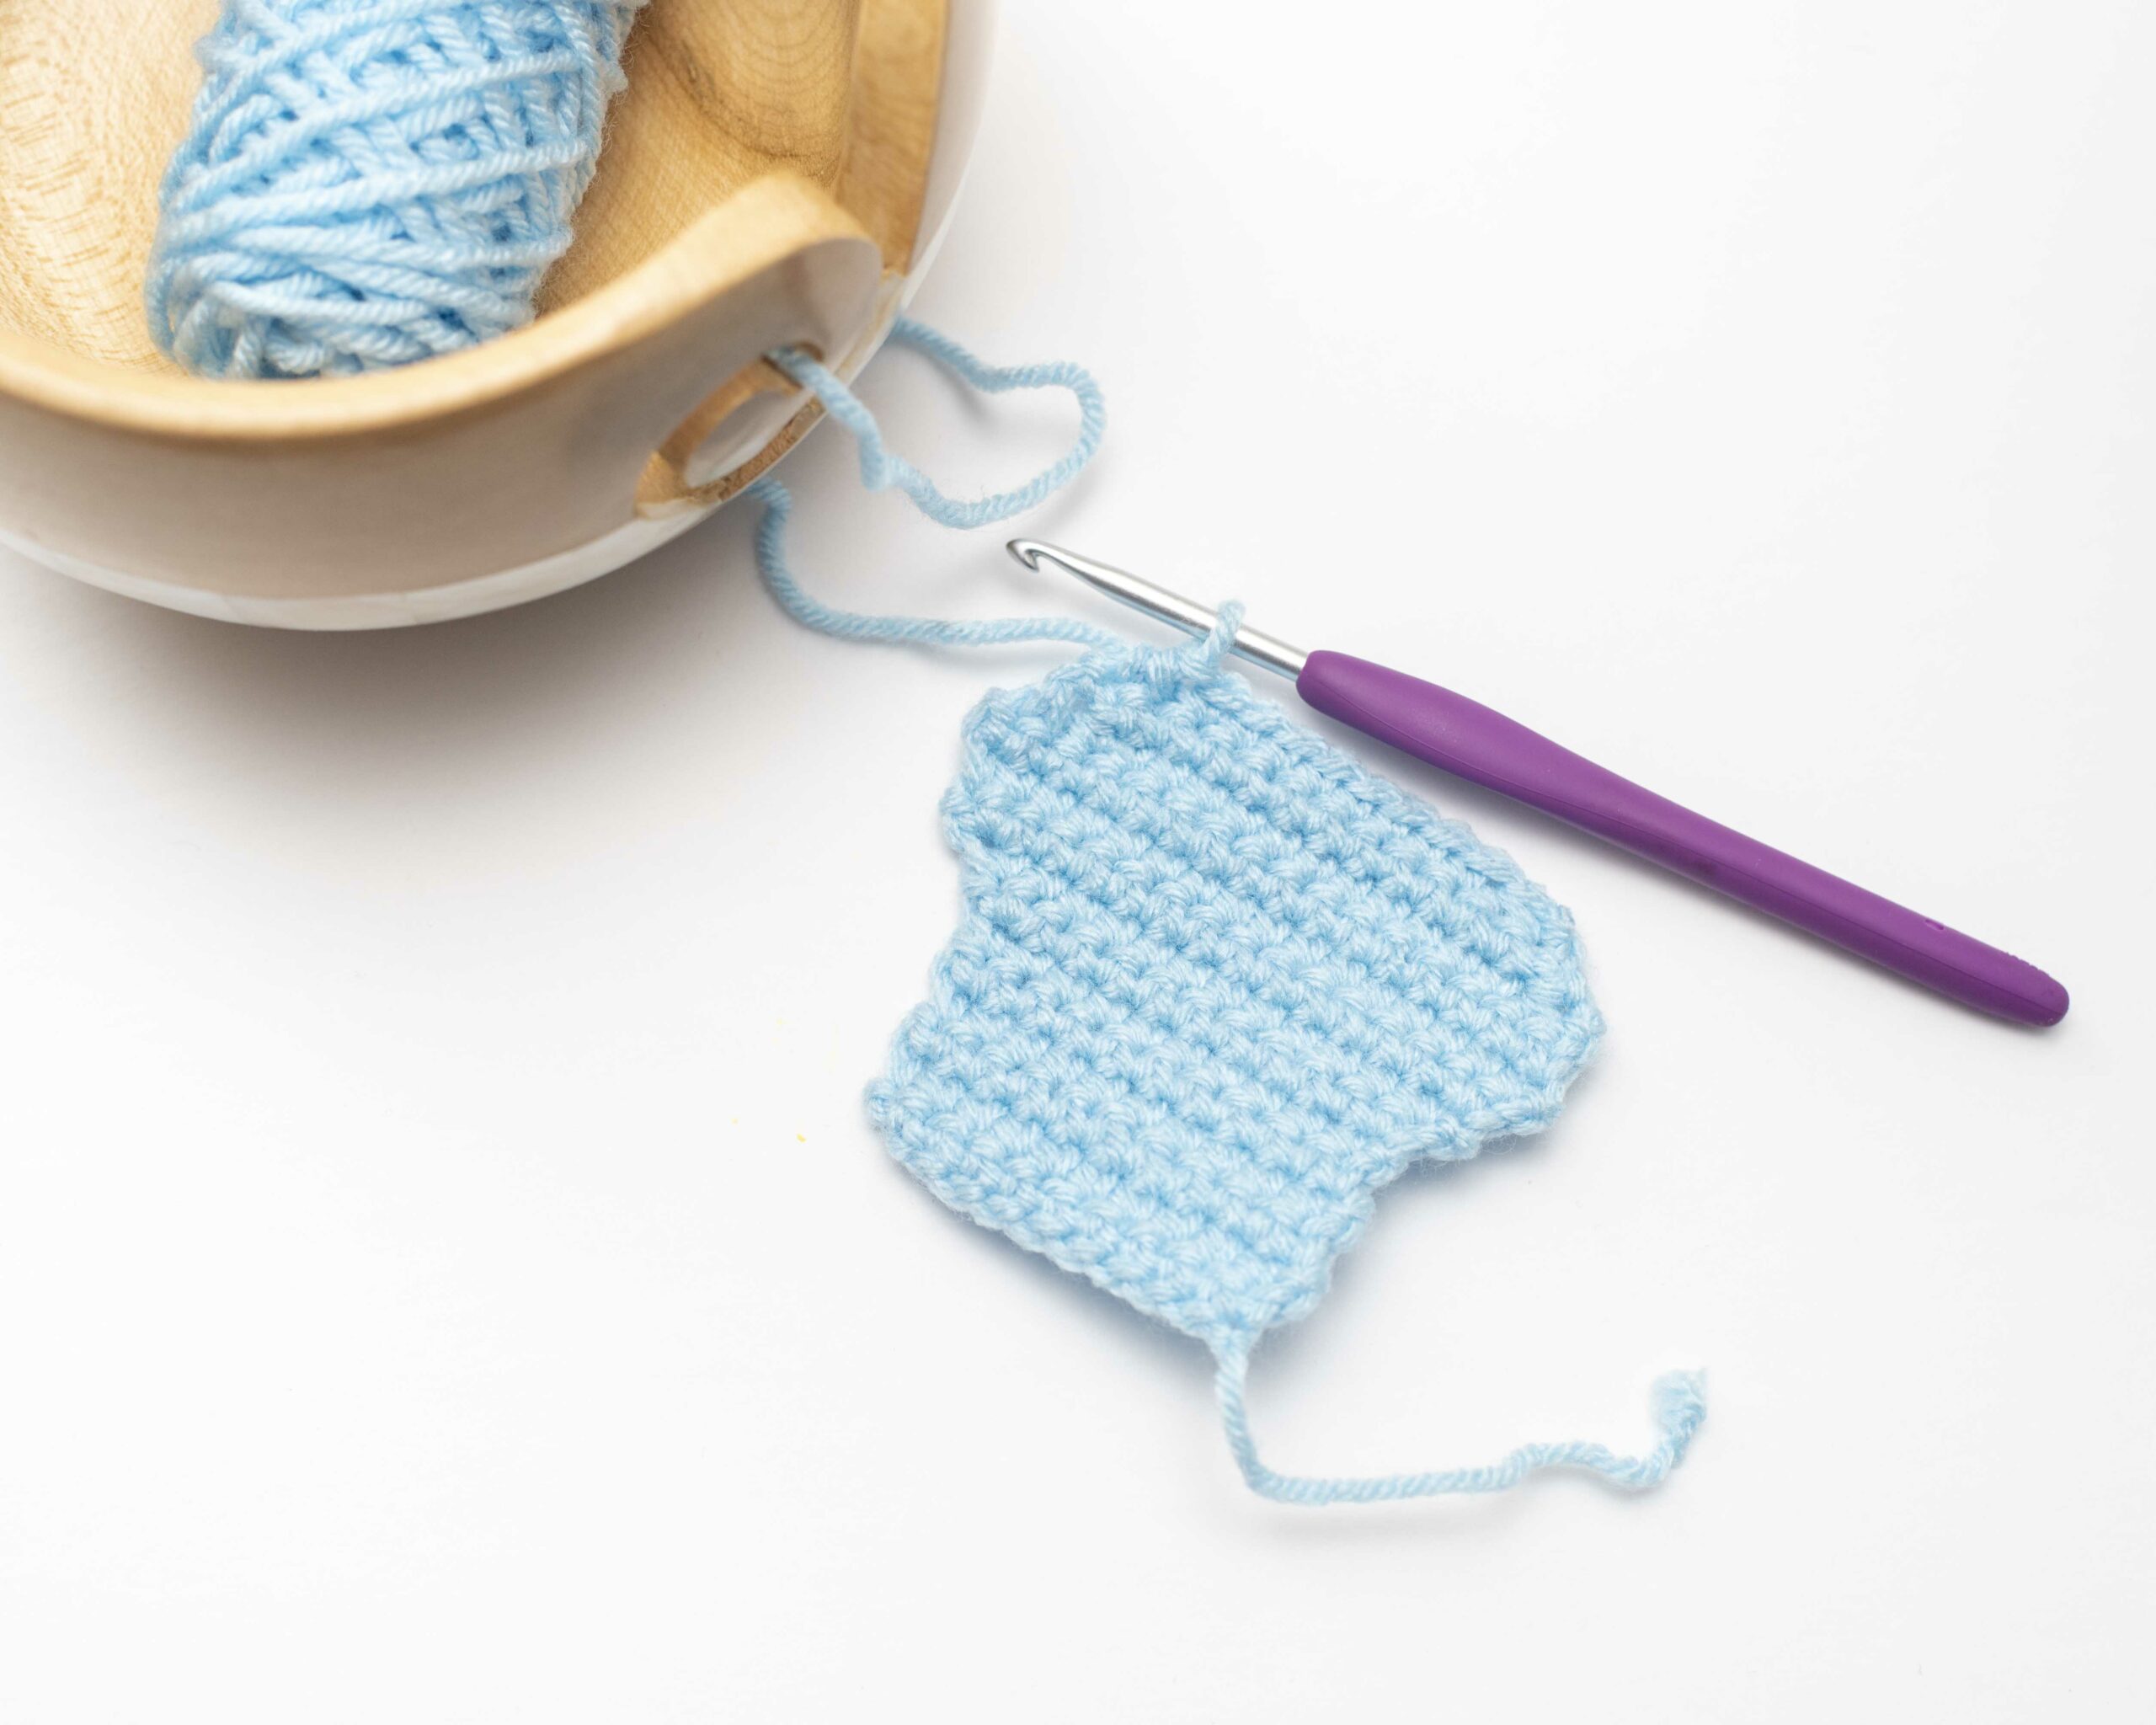 Tools and crochet